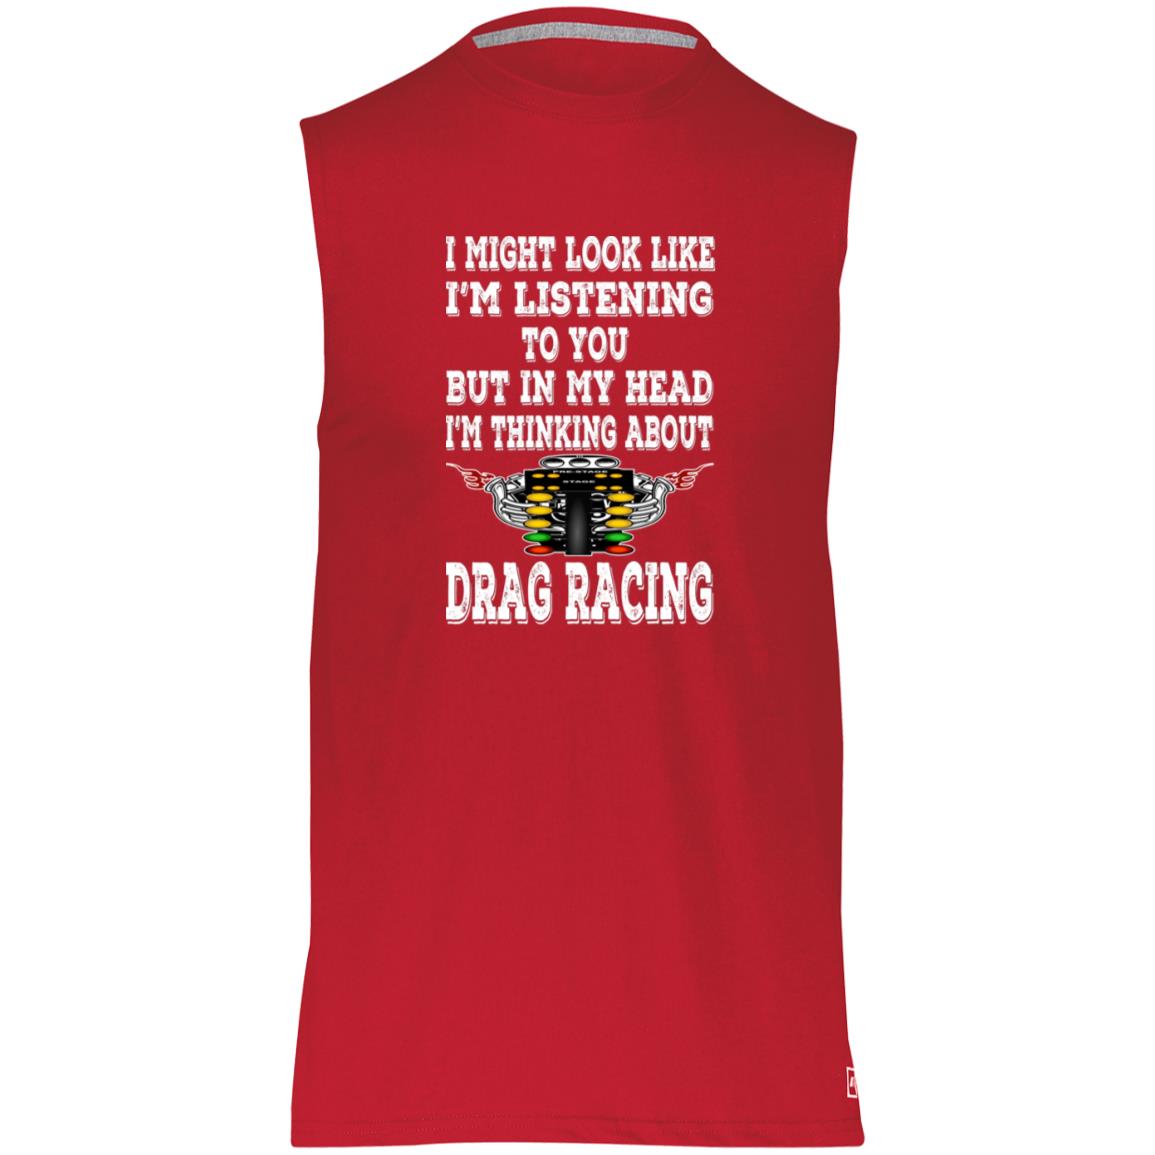 I Might look Like I'm Listening To You Drag Racing Essential Dri-Power Sleeveless Muscle Tee